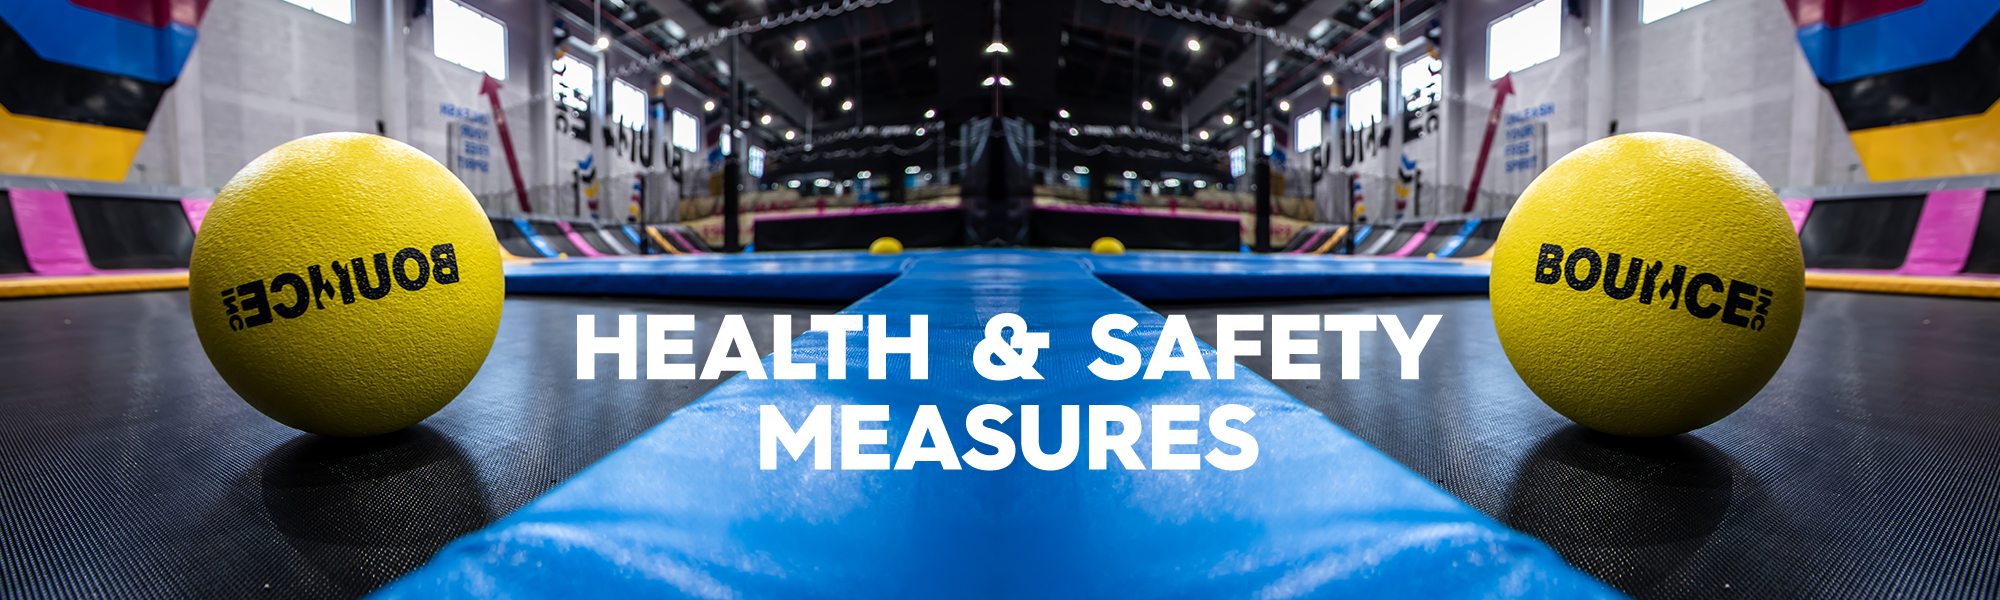 Health & Safety Measures